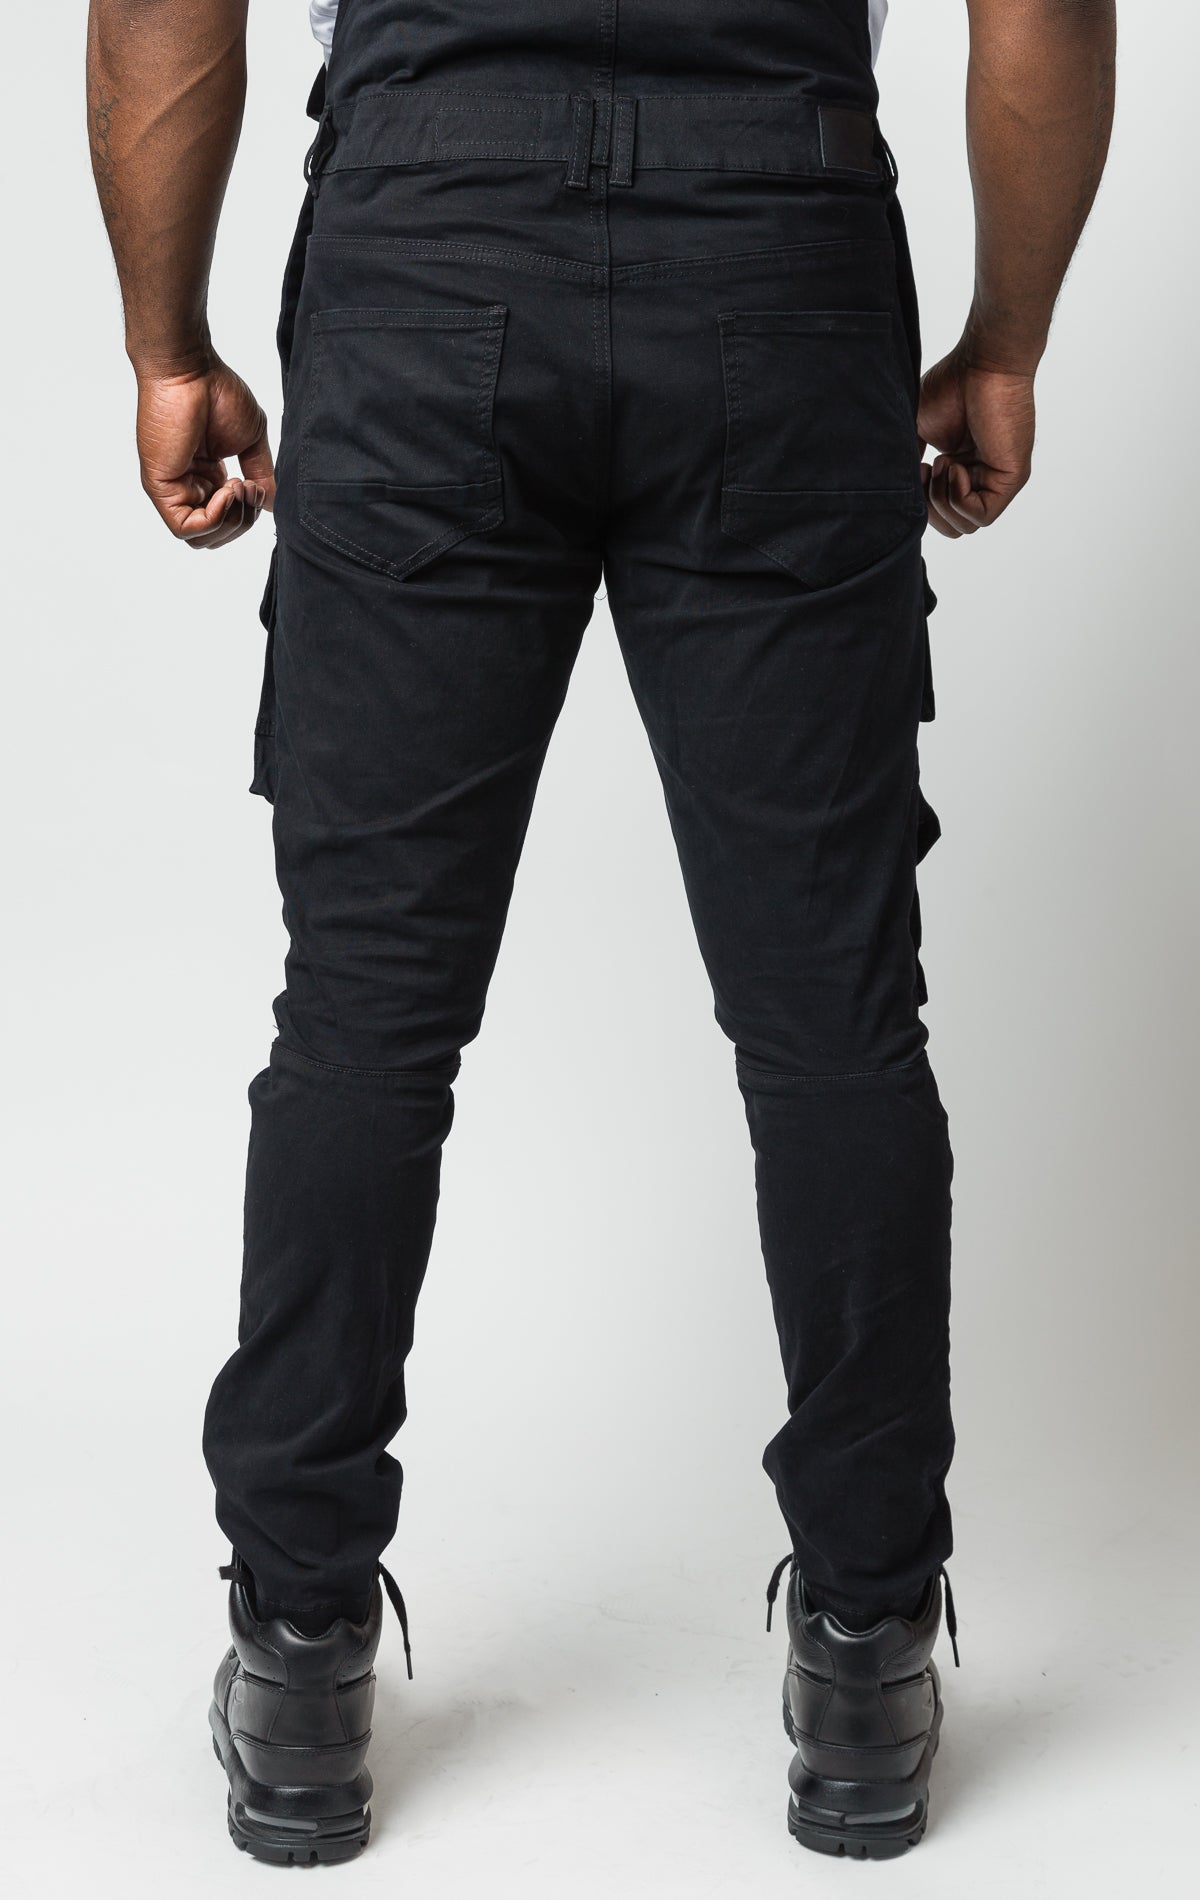 black Cotton twill overalls with cargo pockets and adjustable shoulder straps.